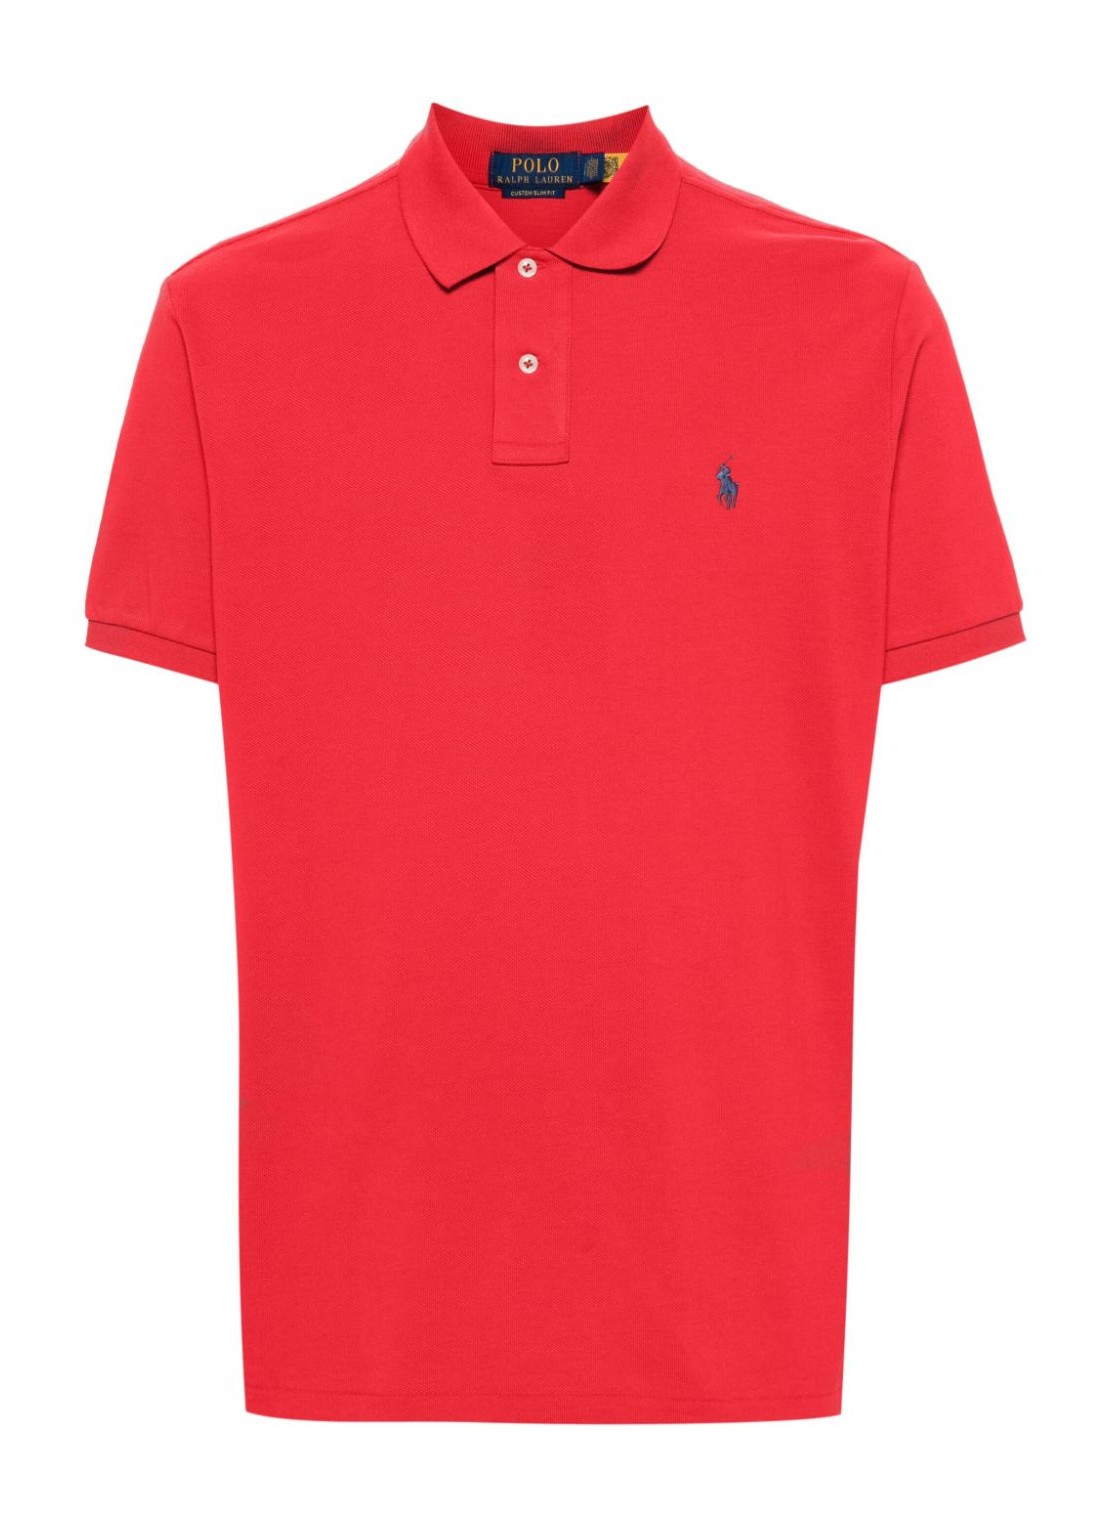 Polo polo ralph lauren polo man sskccmslm1-short sleeve-knit 710680784347 post red c7532 talla rojo
